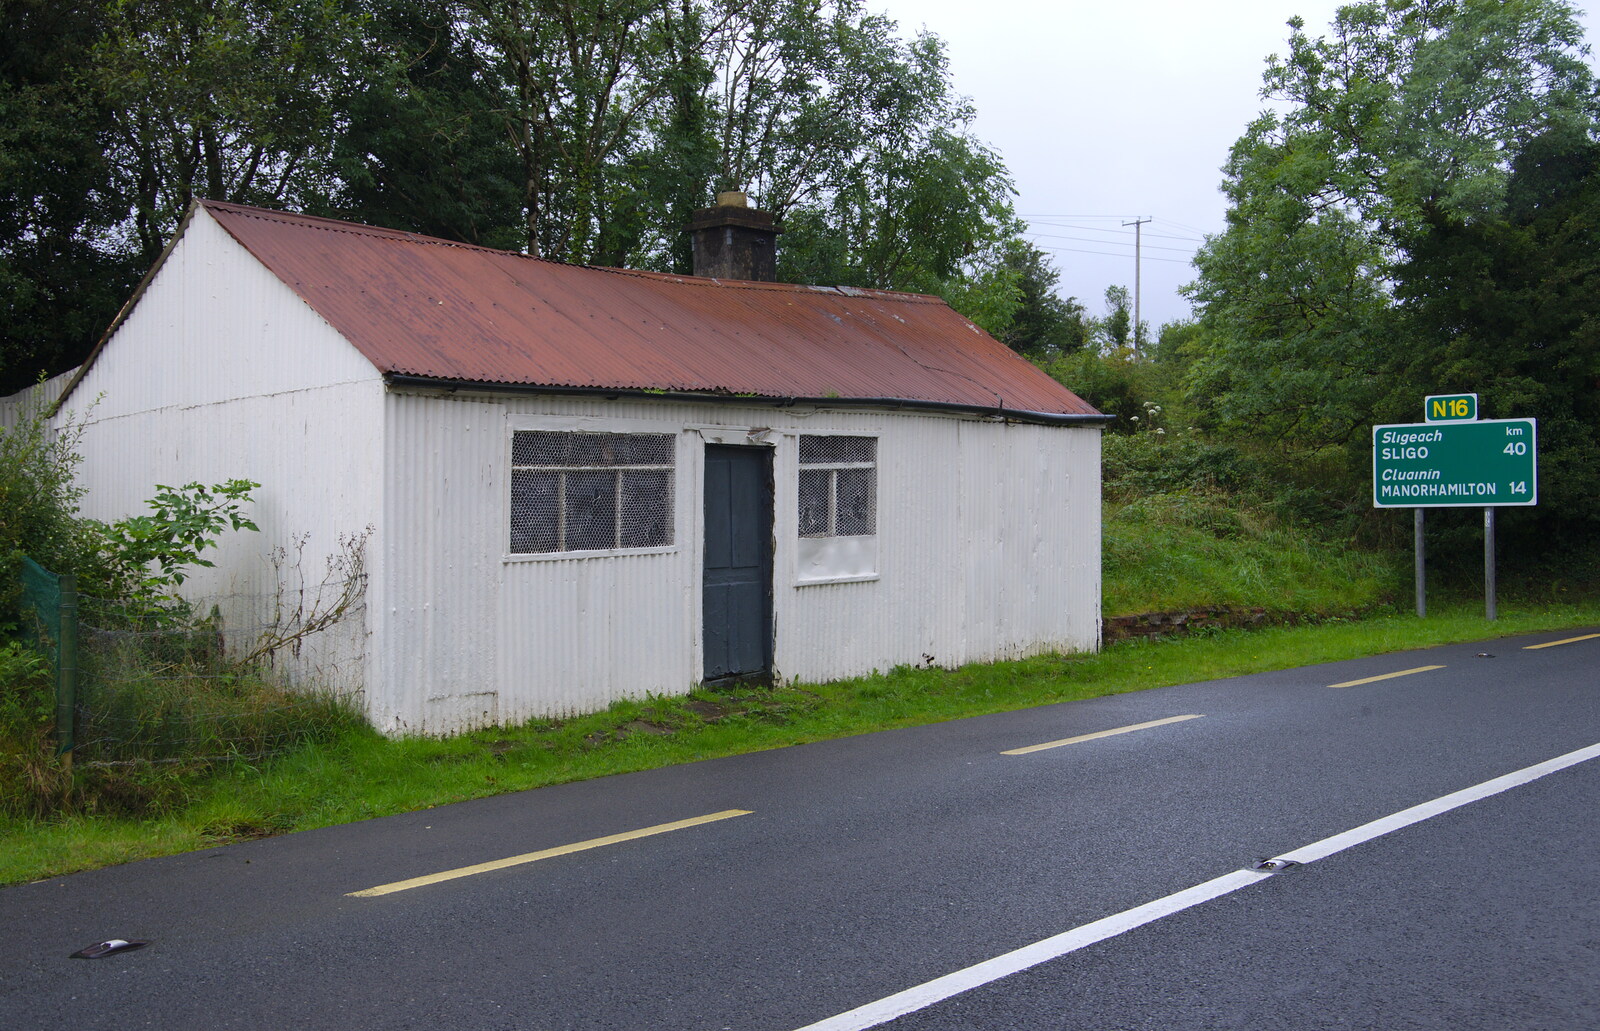 Derelict hut outside Glenfarne from Travels in the Borderlands: An Blaic/Blacklion to Belcoo and back, Cavan and Fermanagh, Ireland - 22nd August 2019